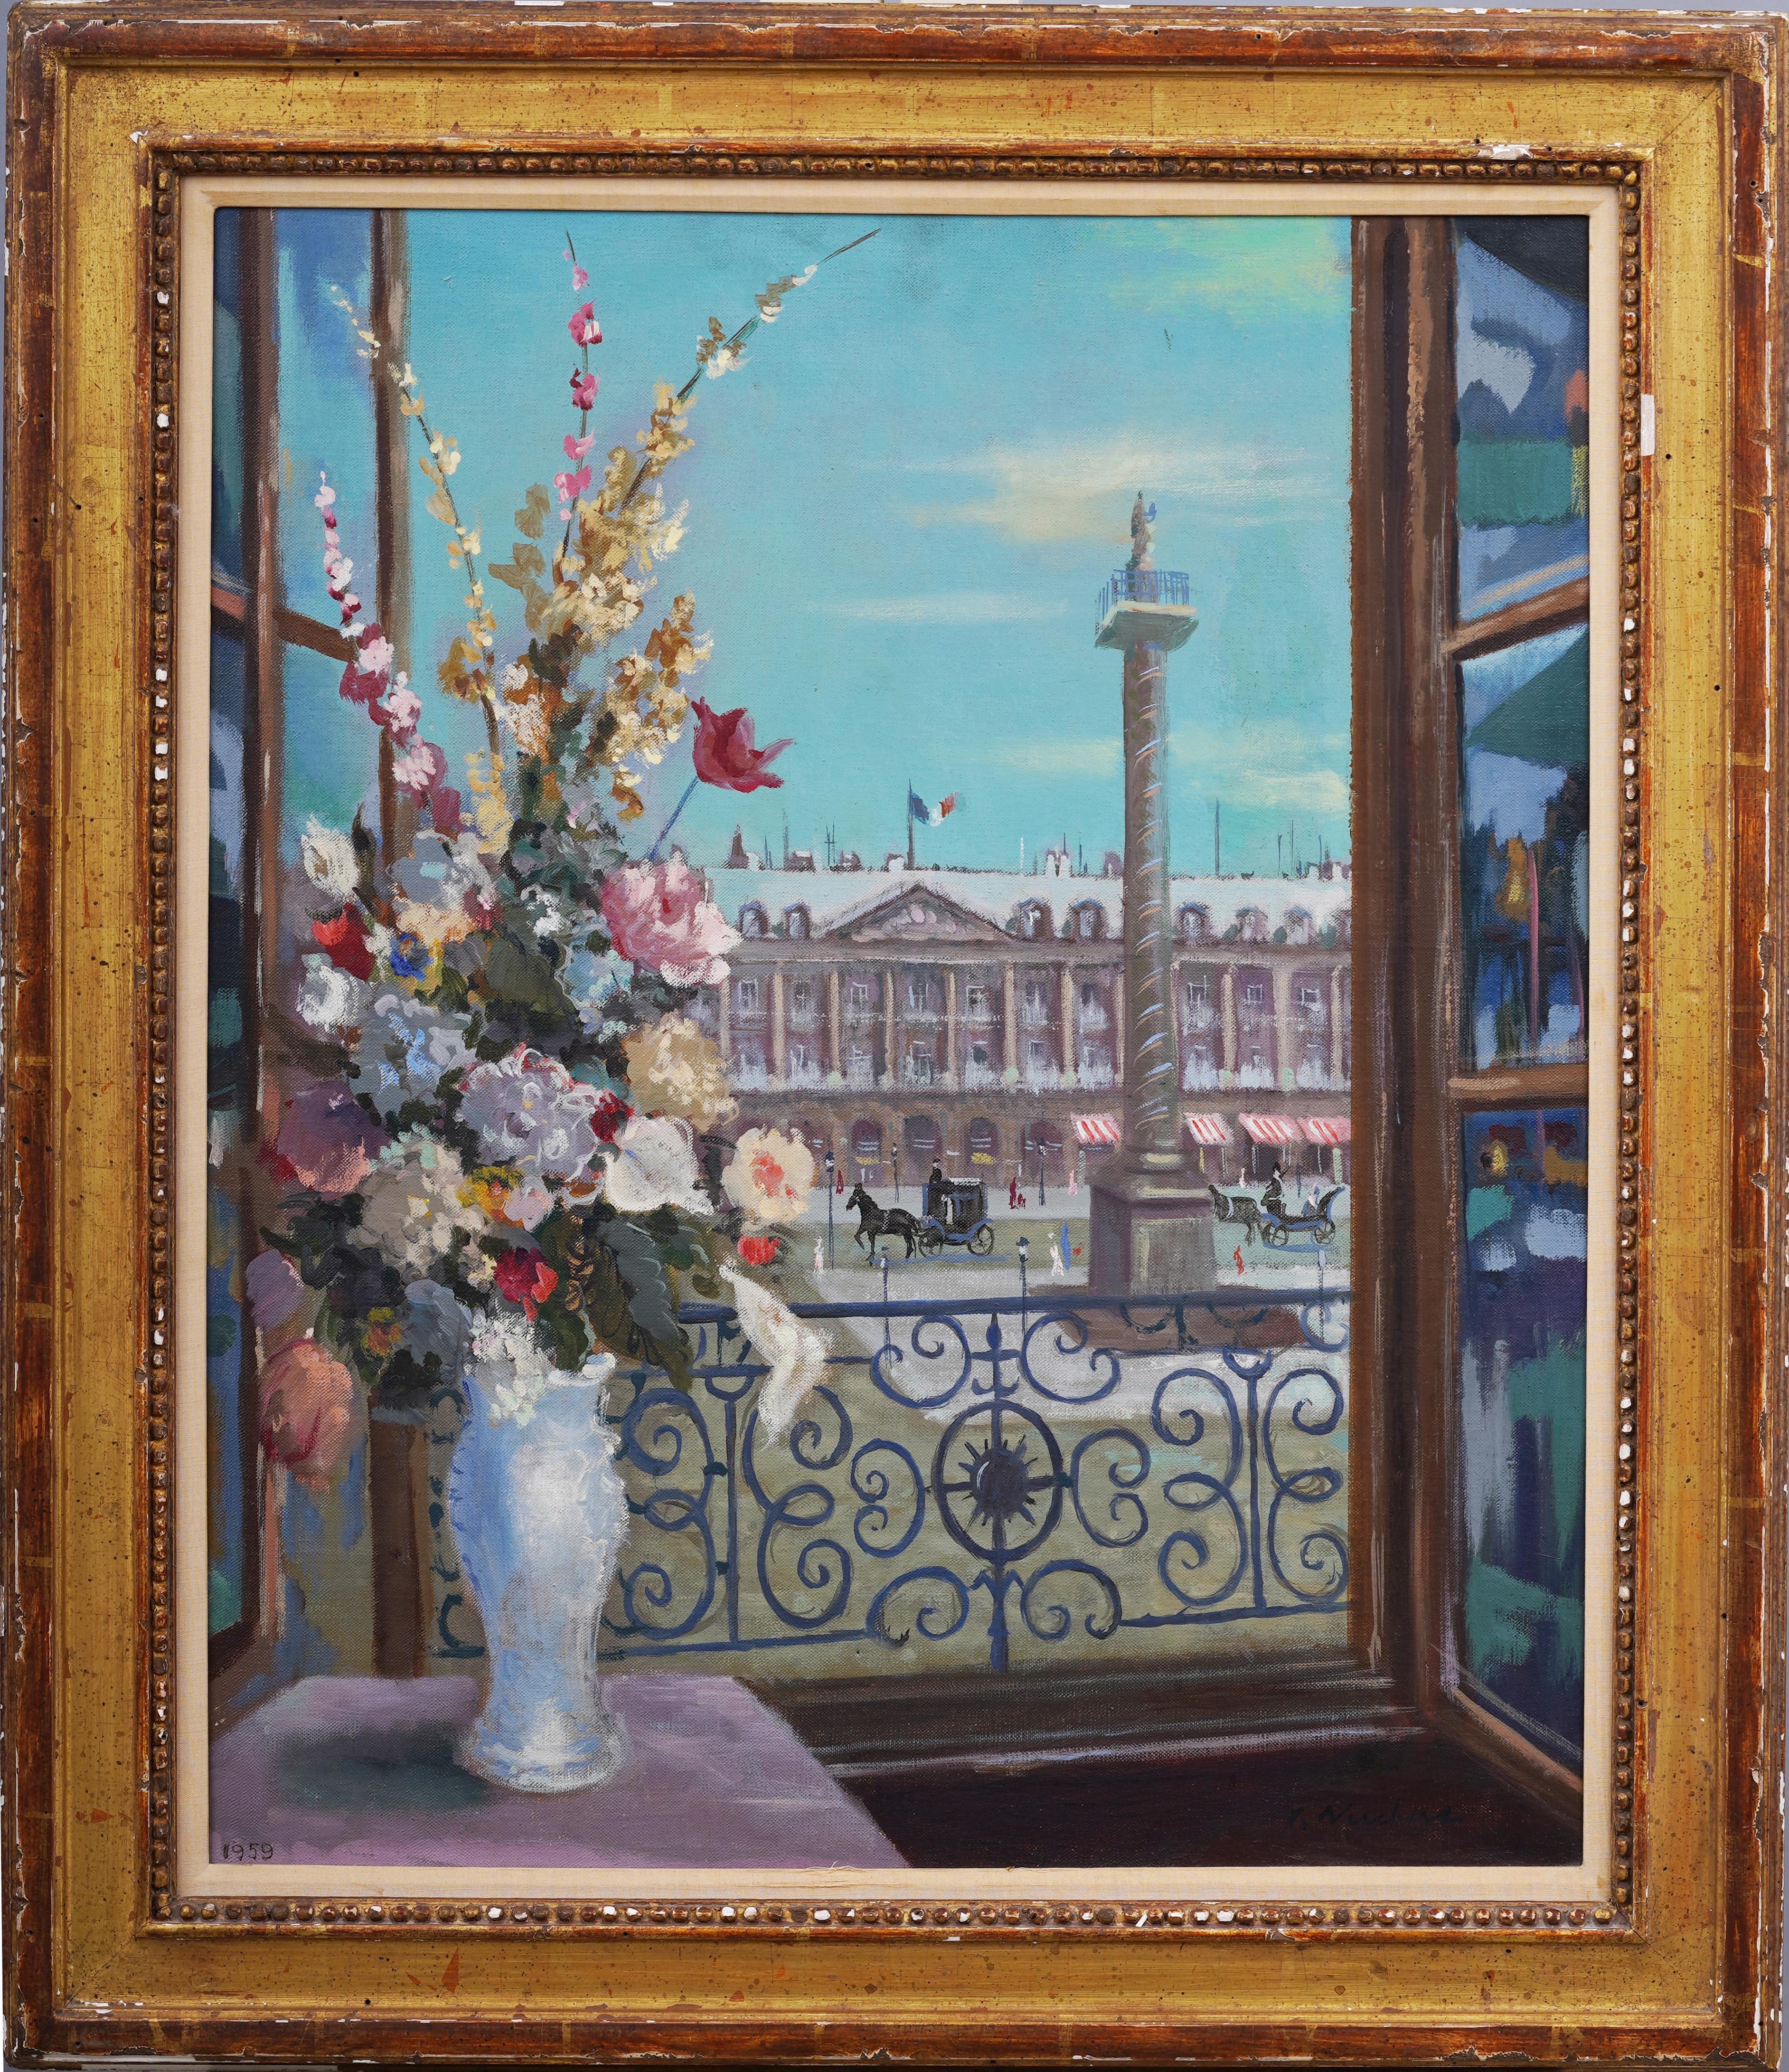 Unknown Still-Life Painting - Antique French Impressionist Paris Street Scene Framed Flower Window Painting